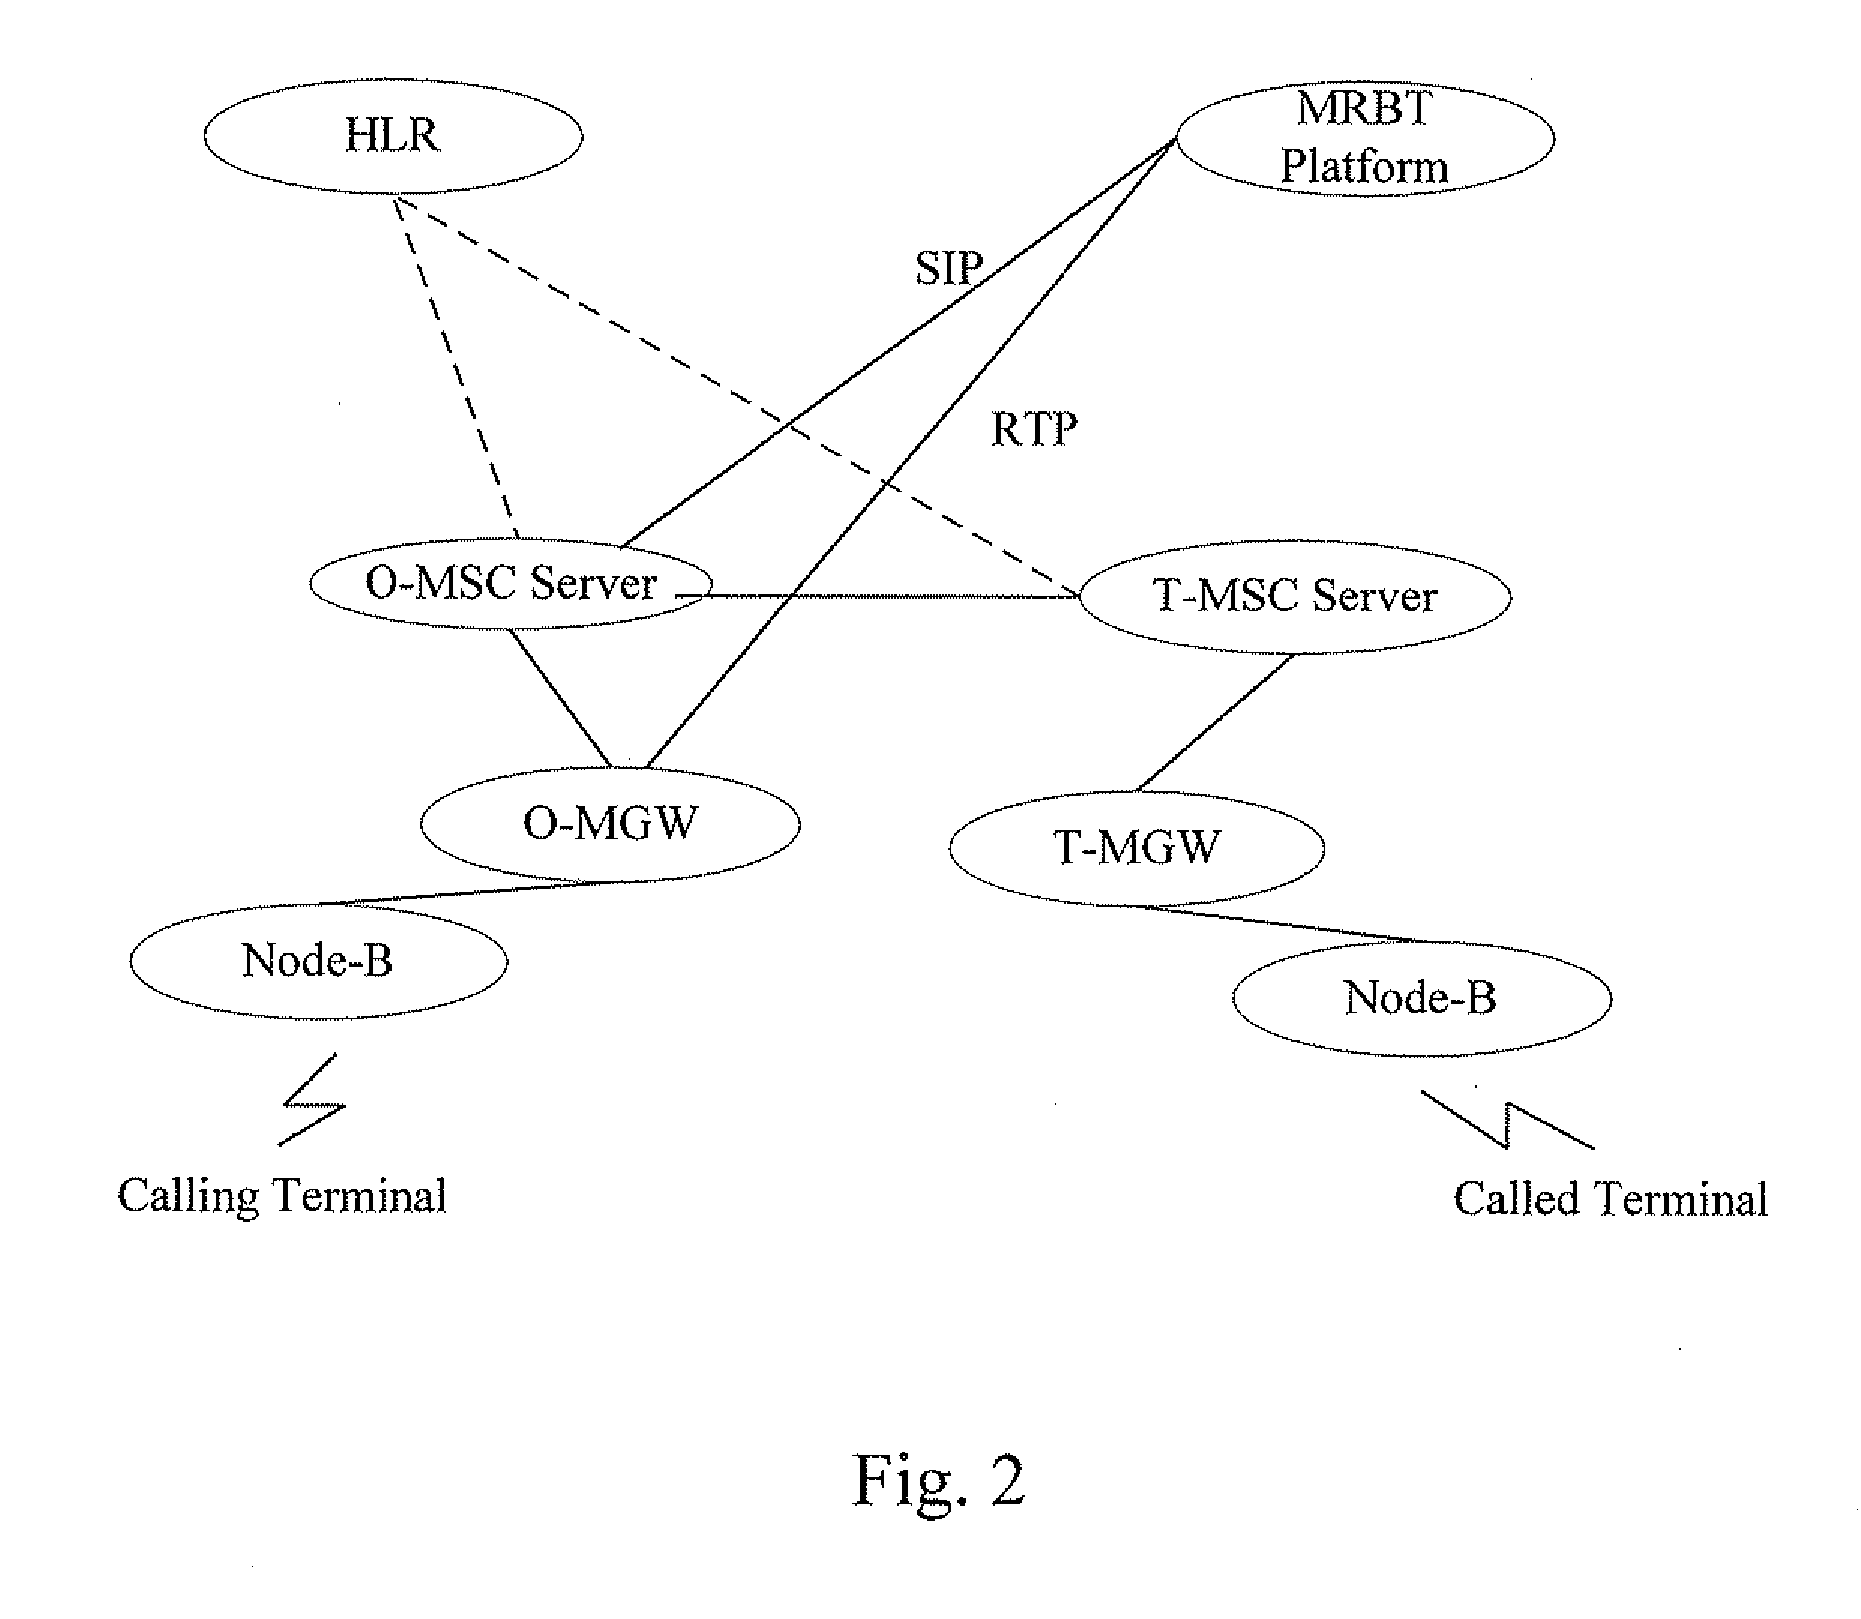 System and Method for Implementing Multimedia Ring Back Tone Service